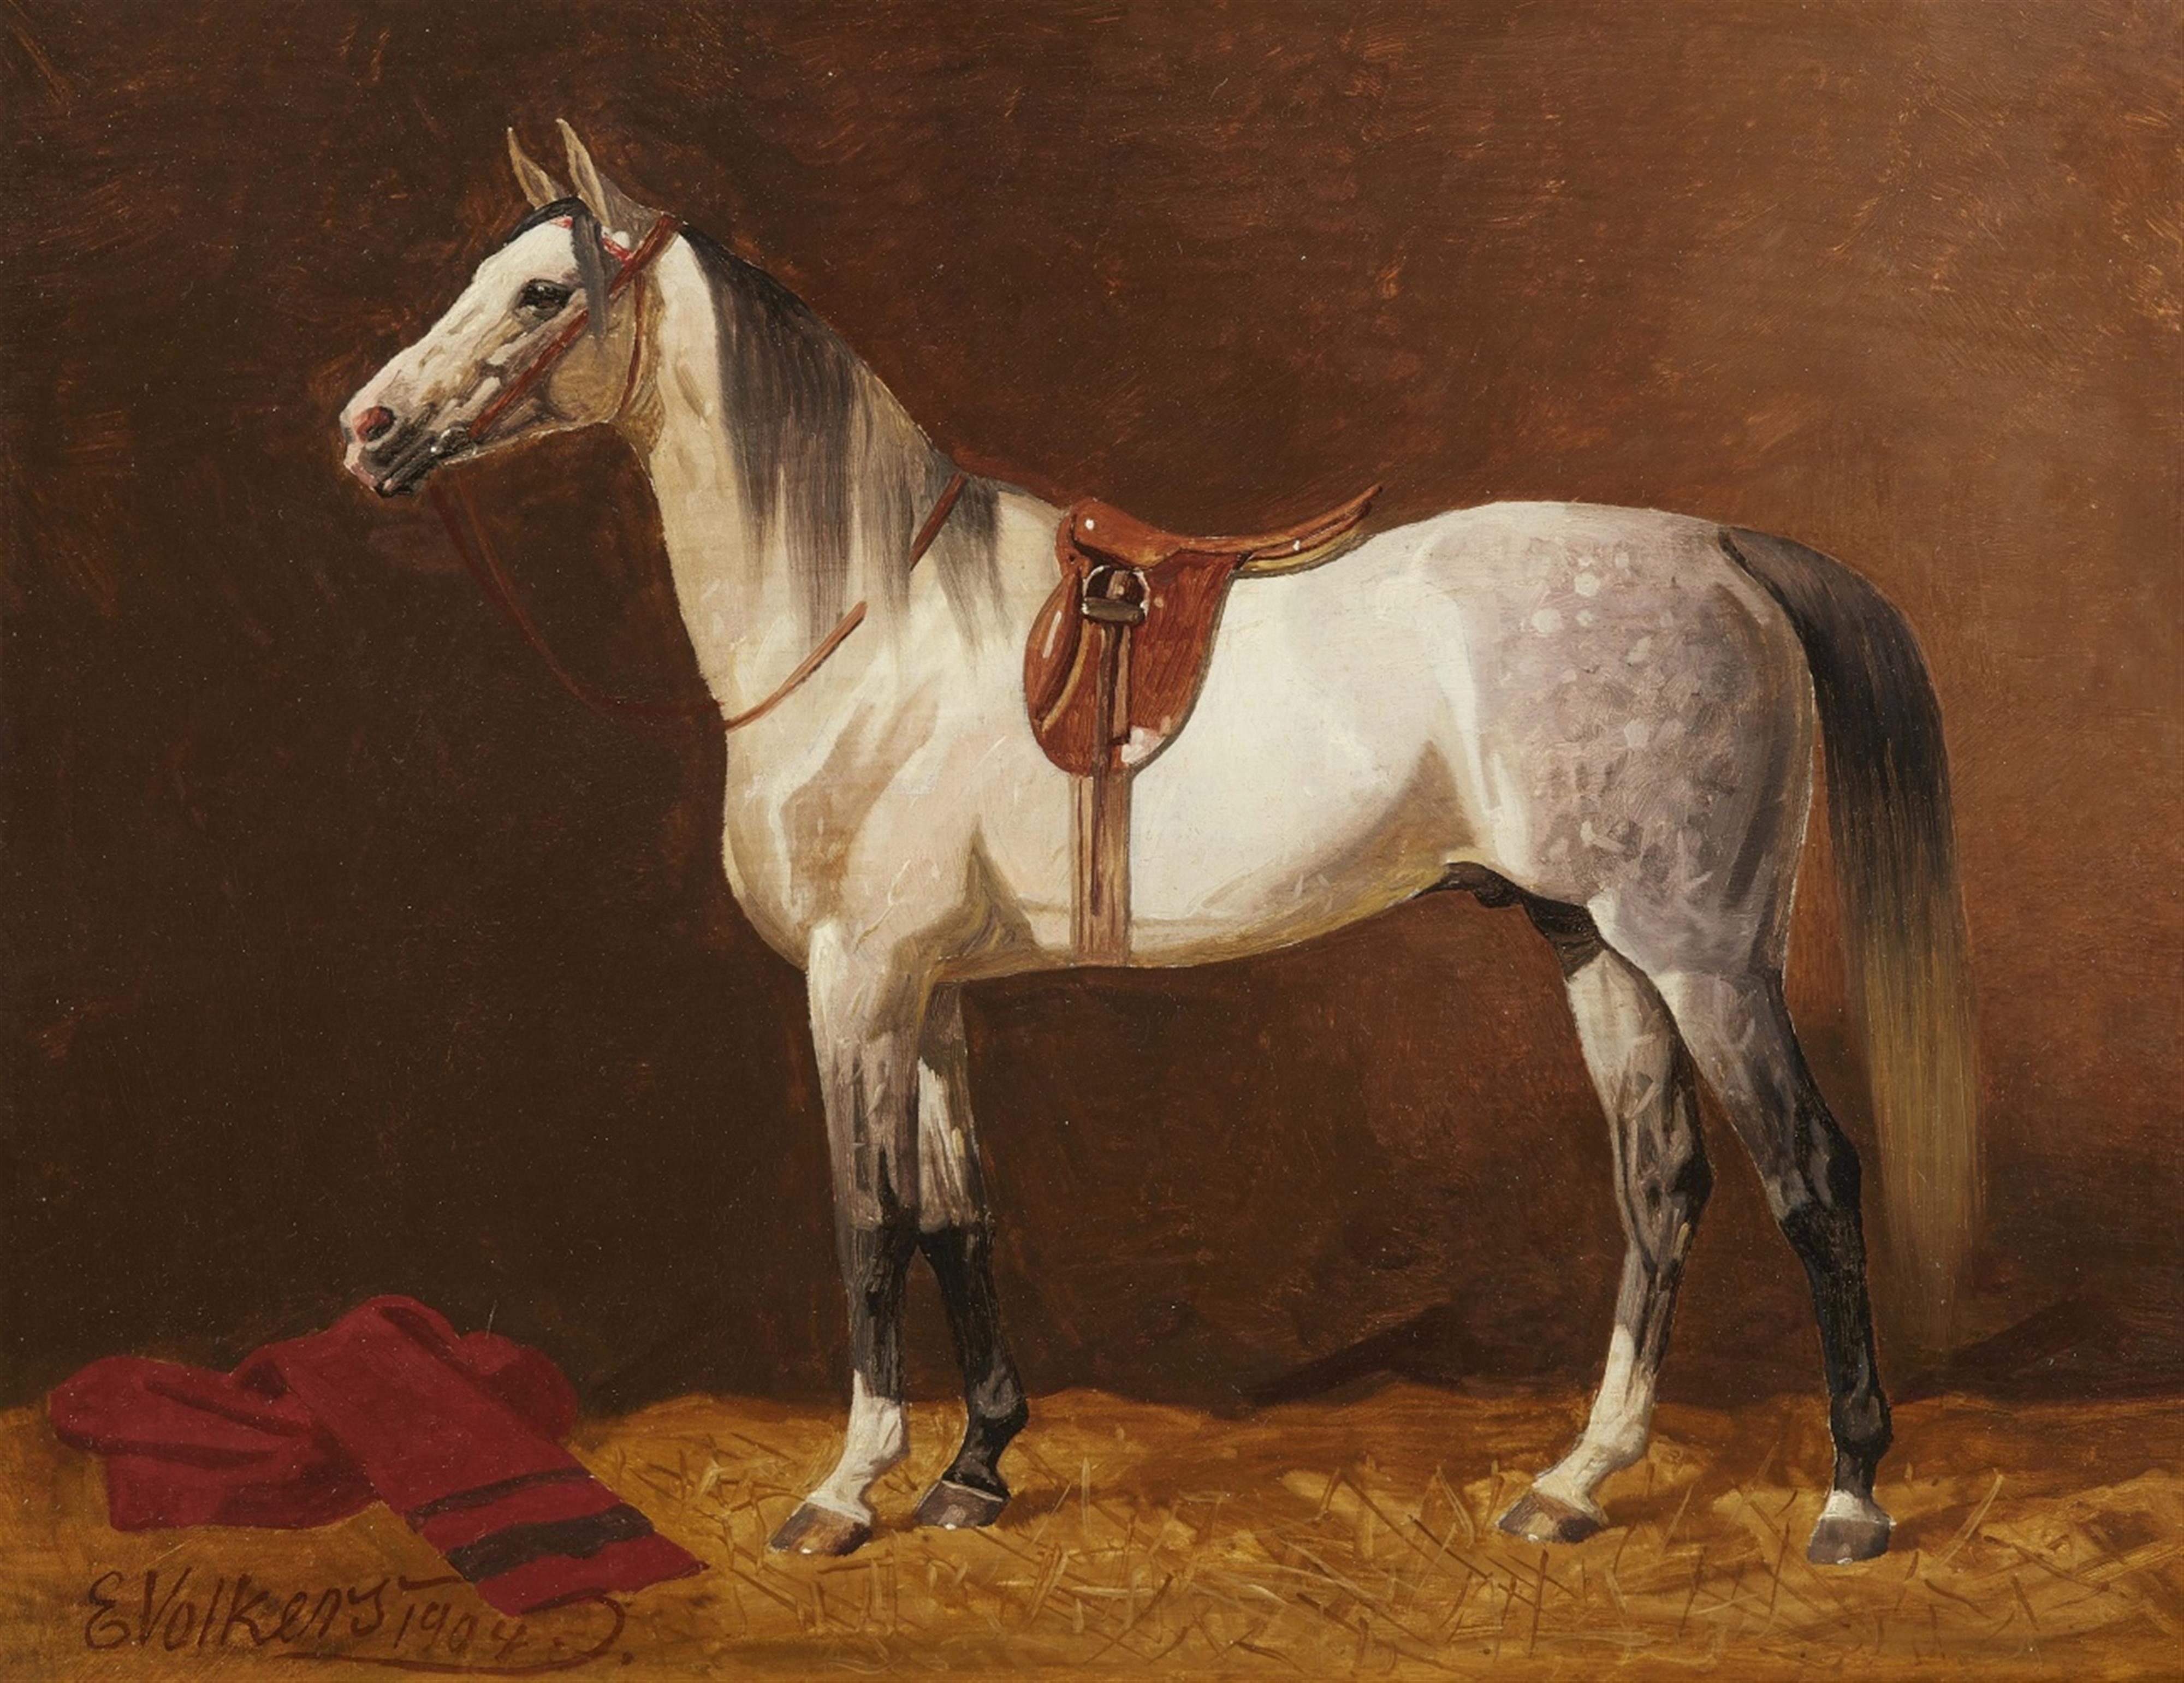 Emil Volkers - Saddled Horse in a Stable - image-1